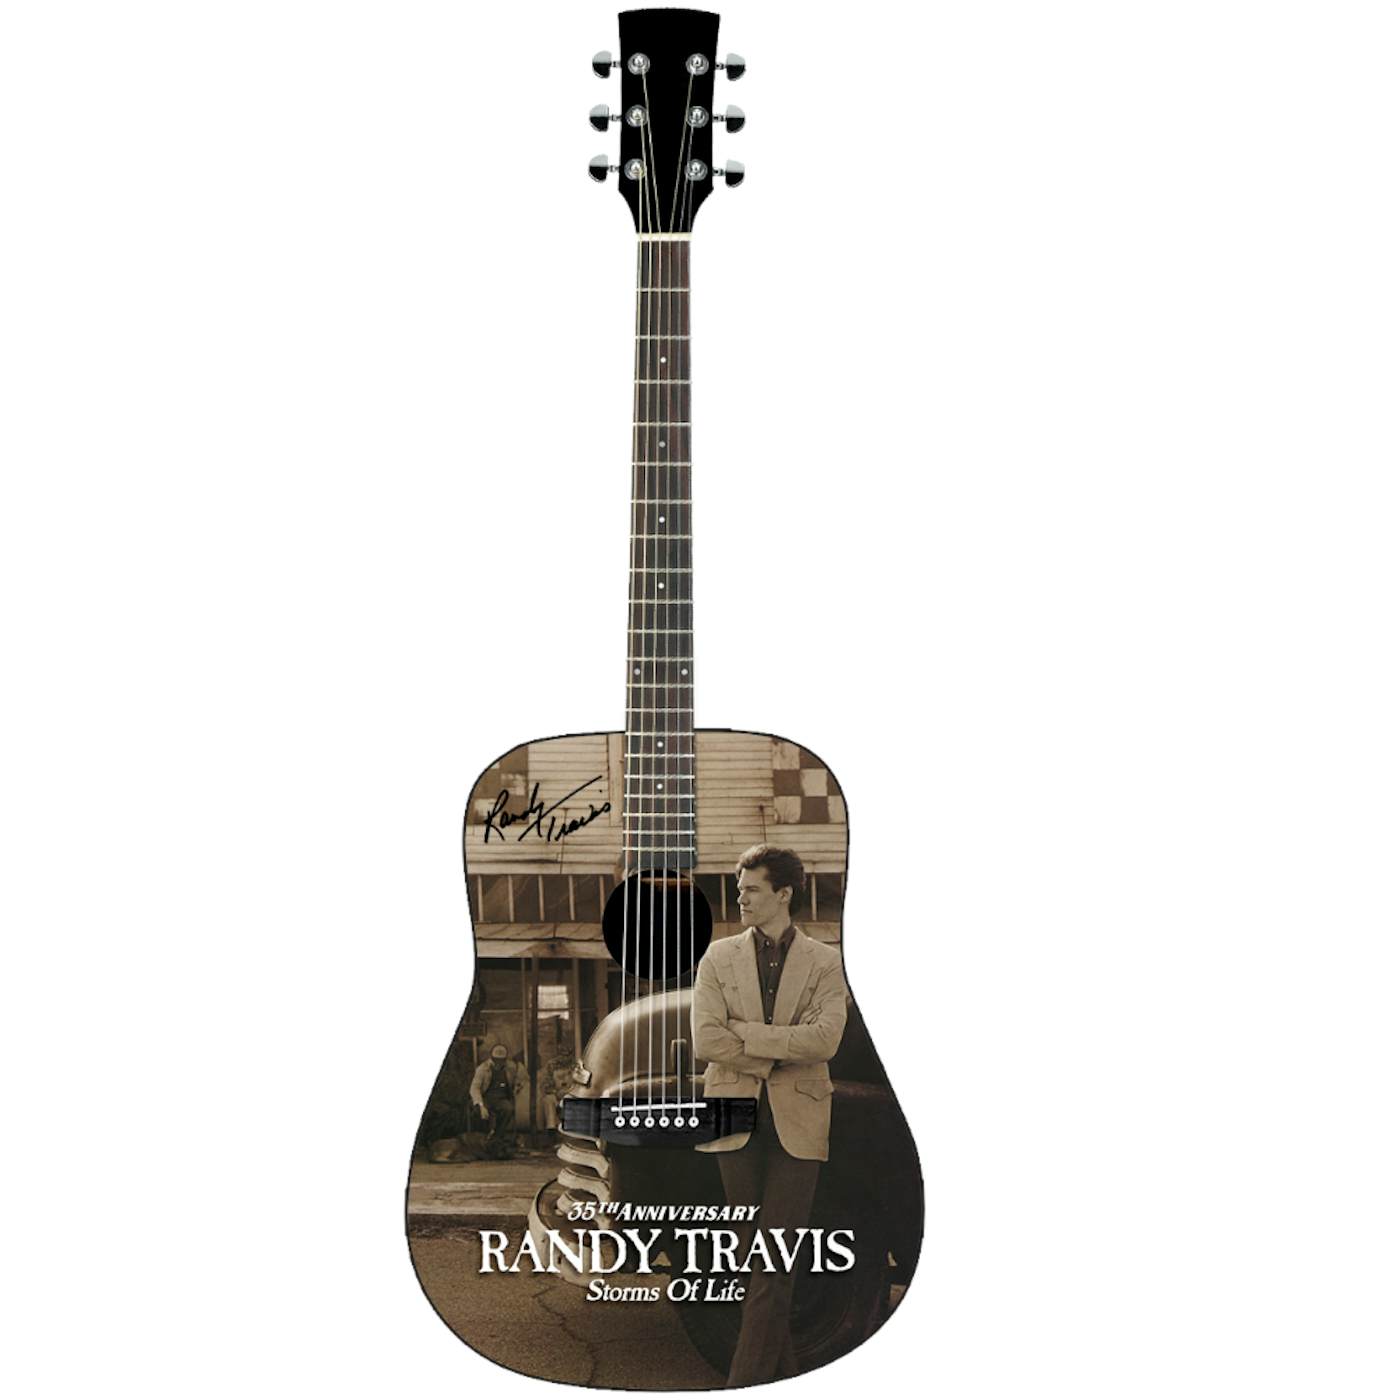 Randy Travis Storms of Life SIGNED Guitar